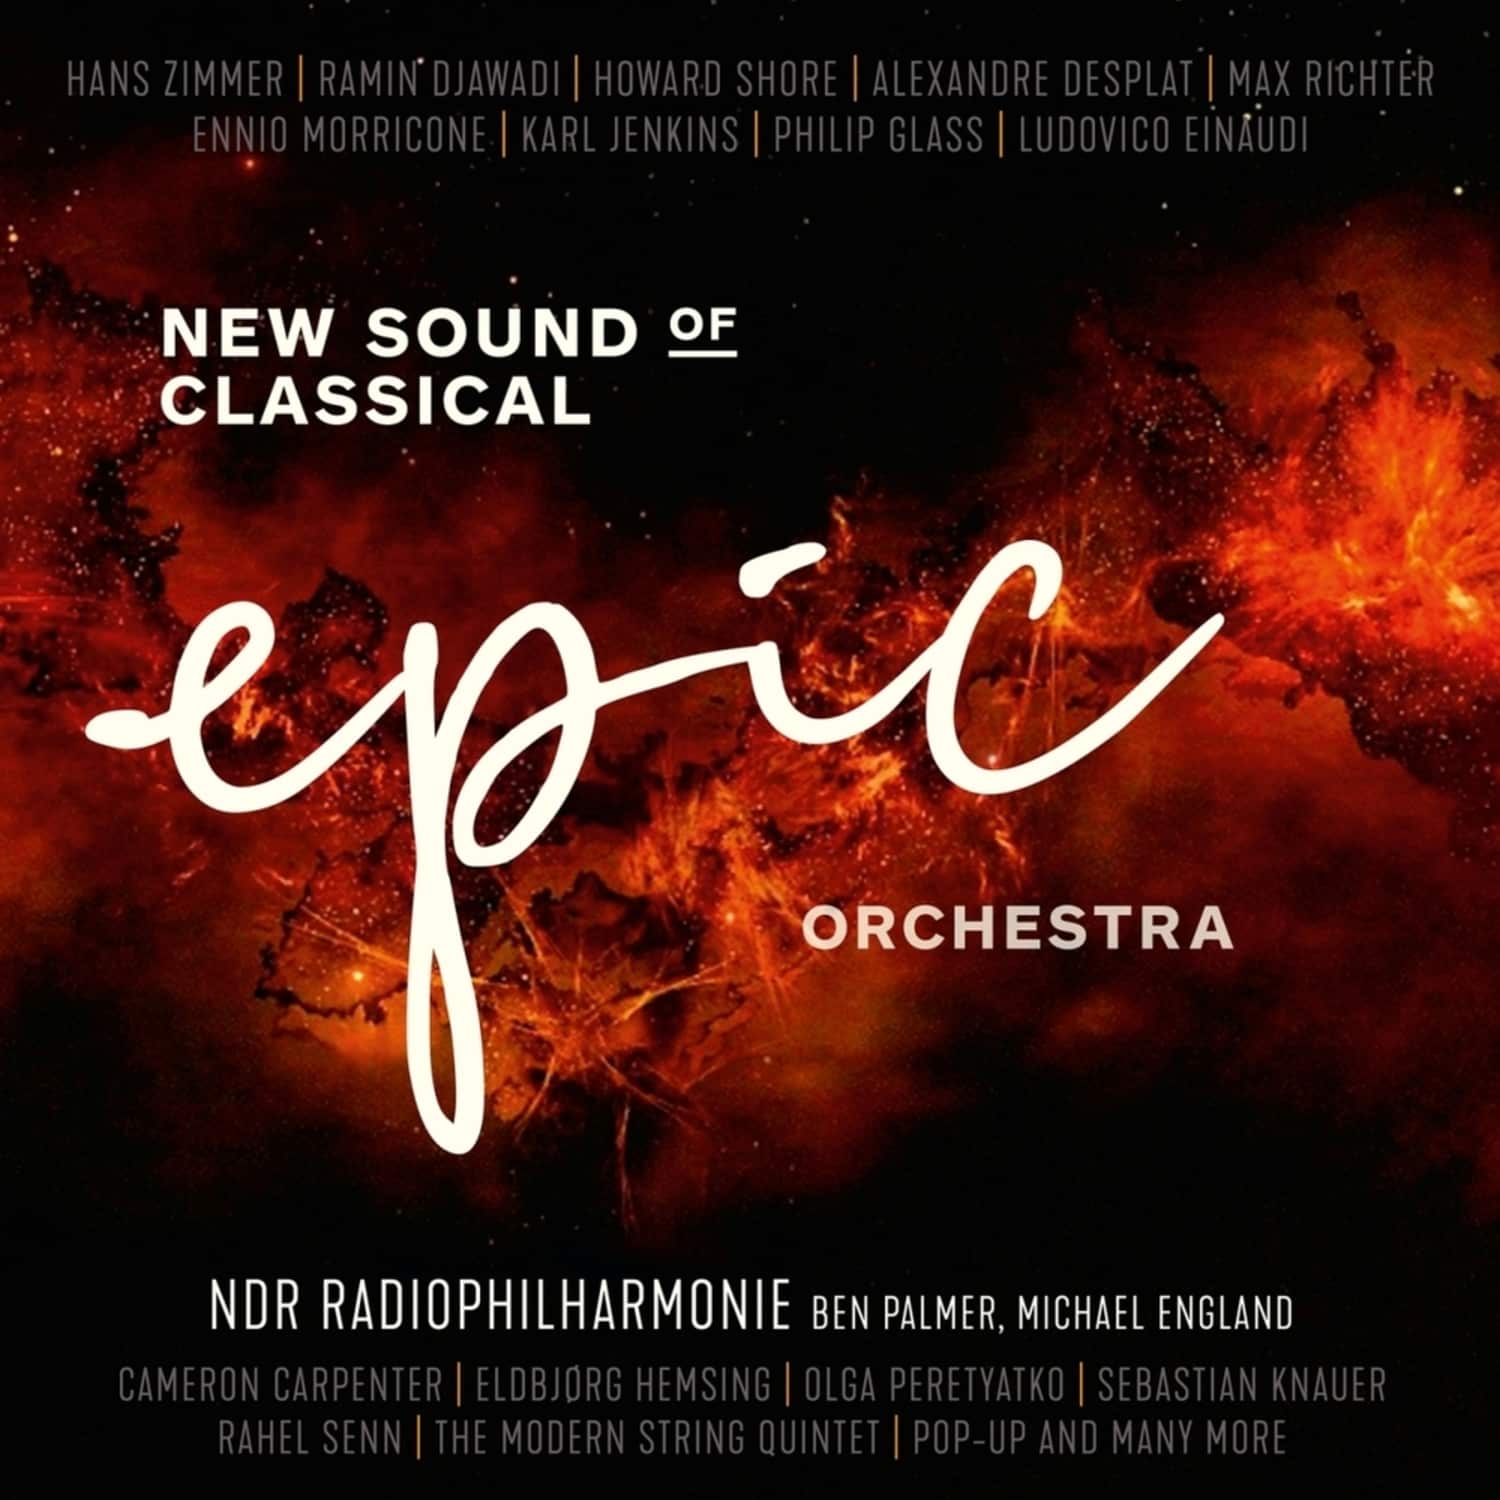 NDR Radiophilharmonie - EPIC ORCHESTRA-NEW SOUND OF CLASSICAL 